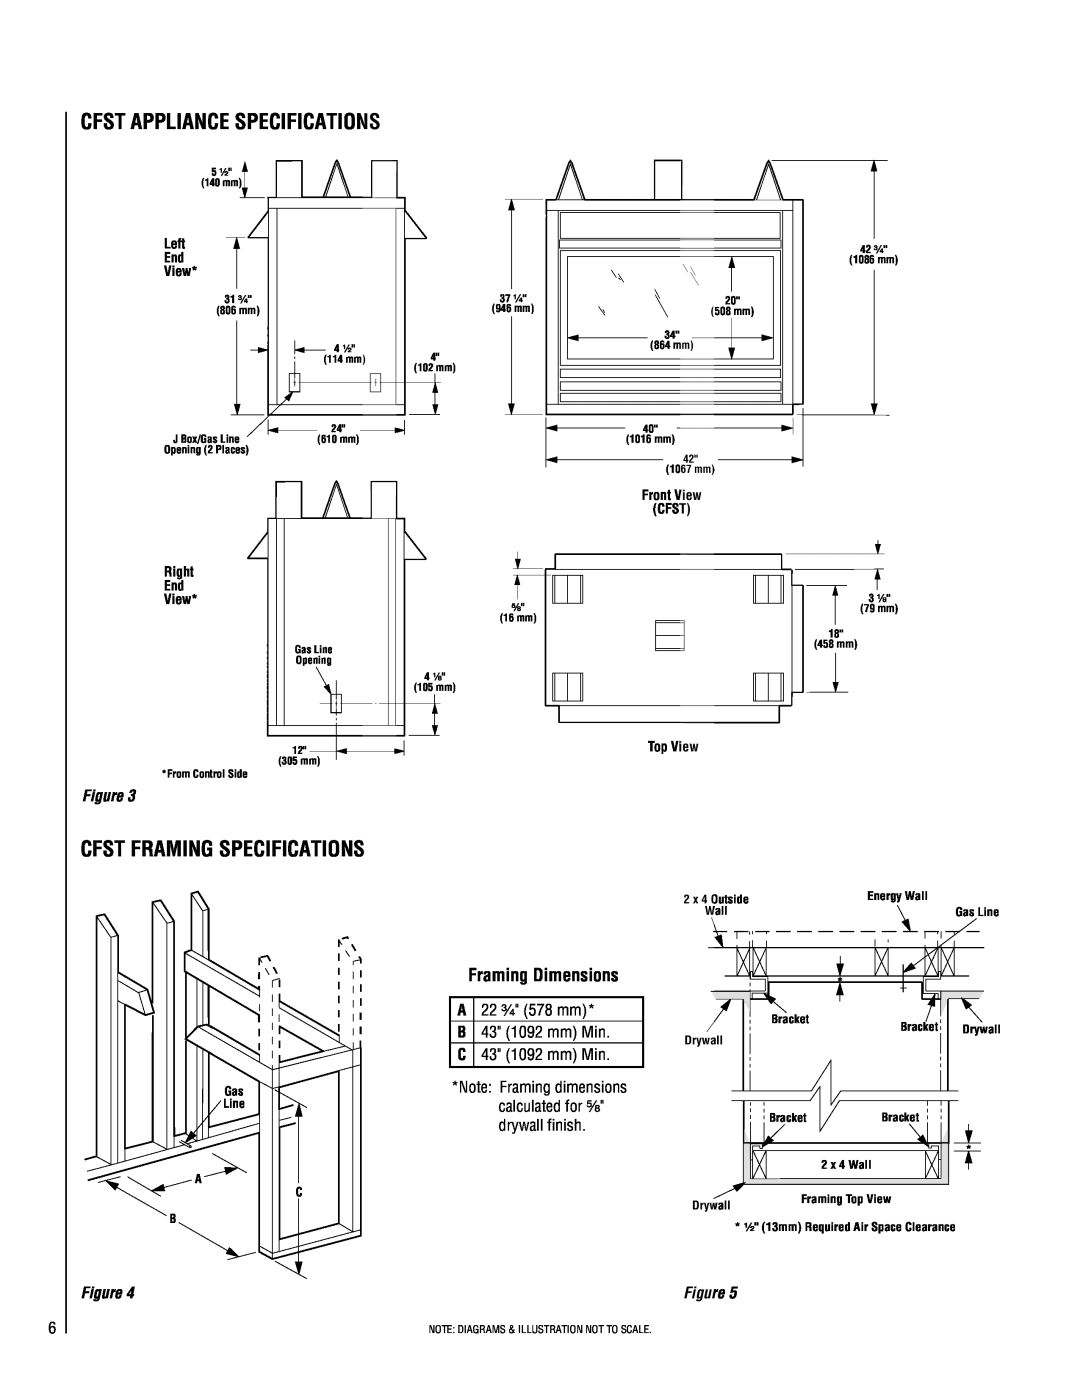 Superior CFPF-CMN Cfst Framing Specifications, Framing Dimensions, Cfst Appliance Specifications, Left End View, Top View 